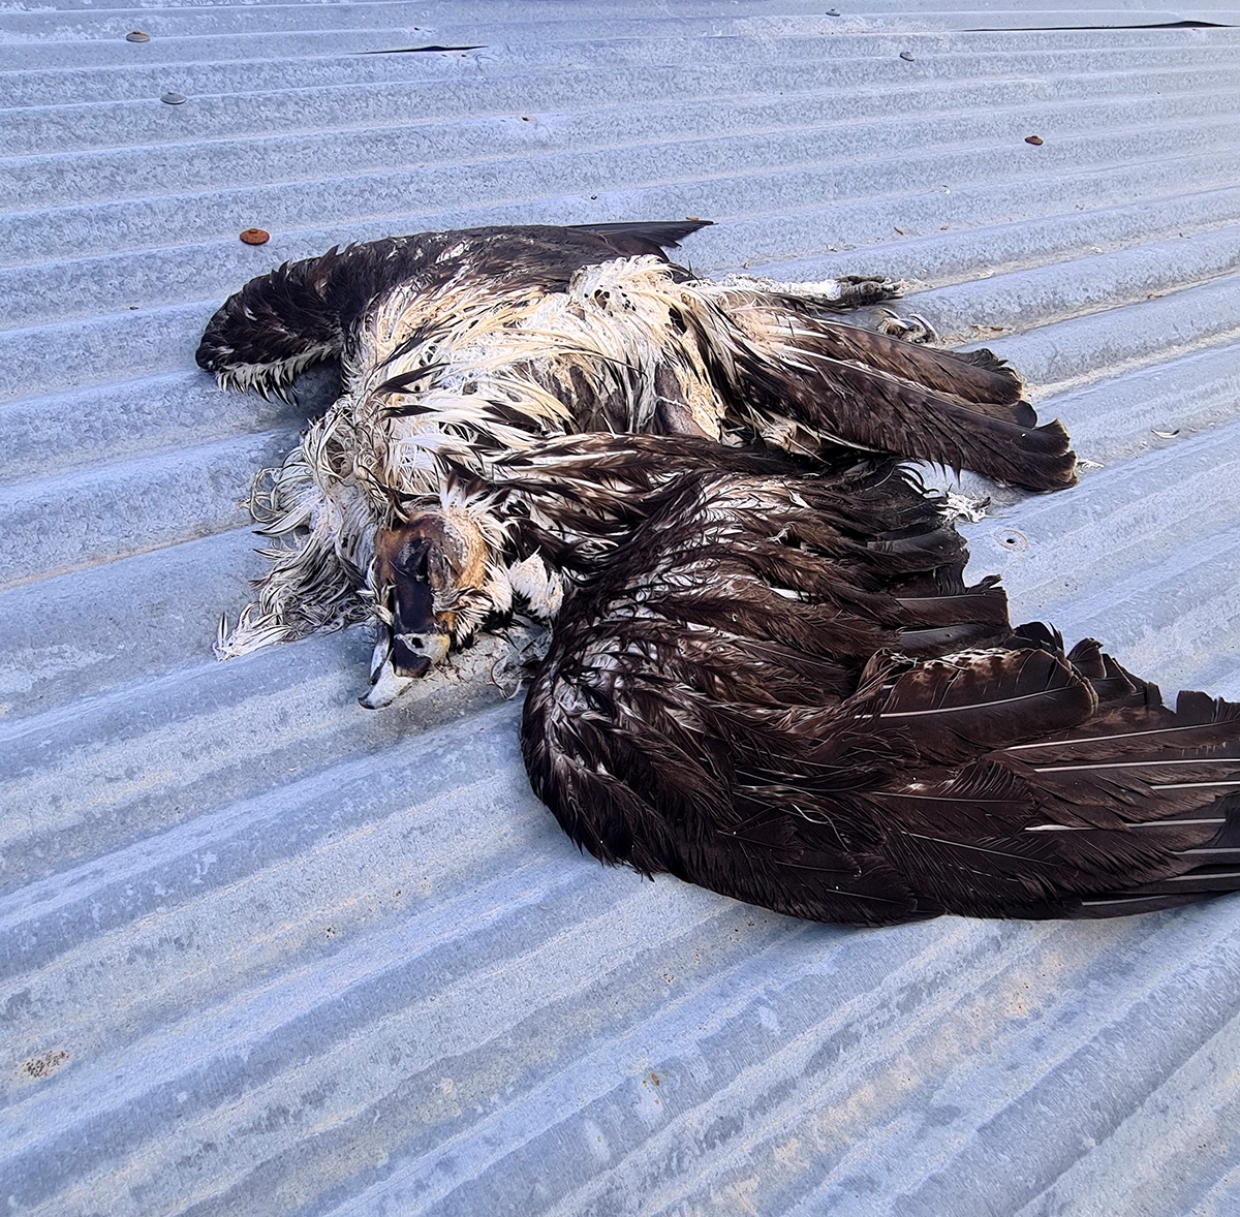 Dead Bonelli’s Eagles from poisoning and shooting in Limassol: the culprit in justice